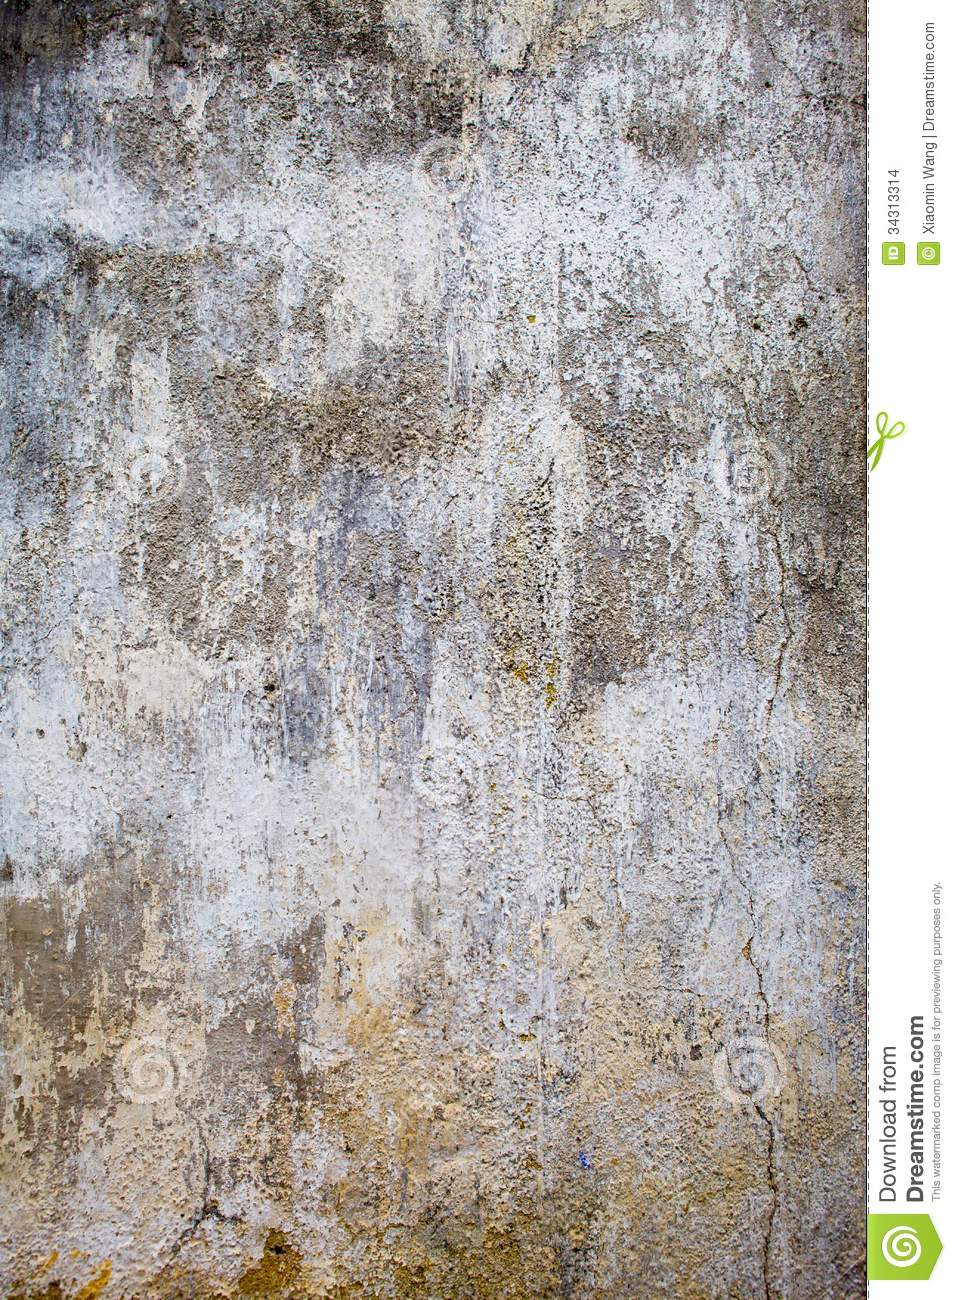 The Old Building Plaster Wall Stock Images   Image  34313314